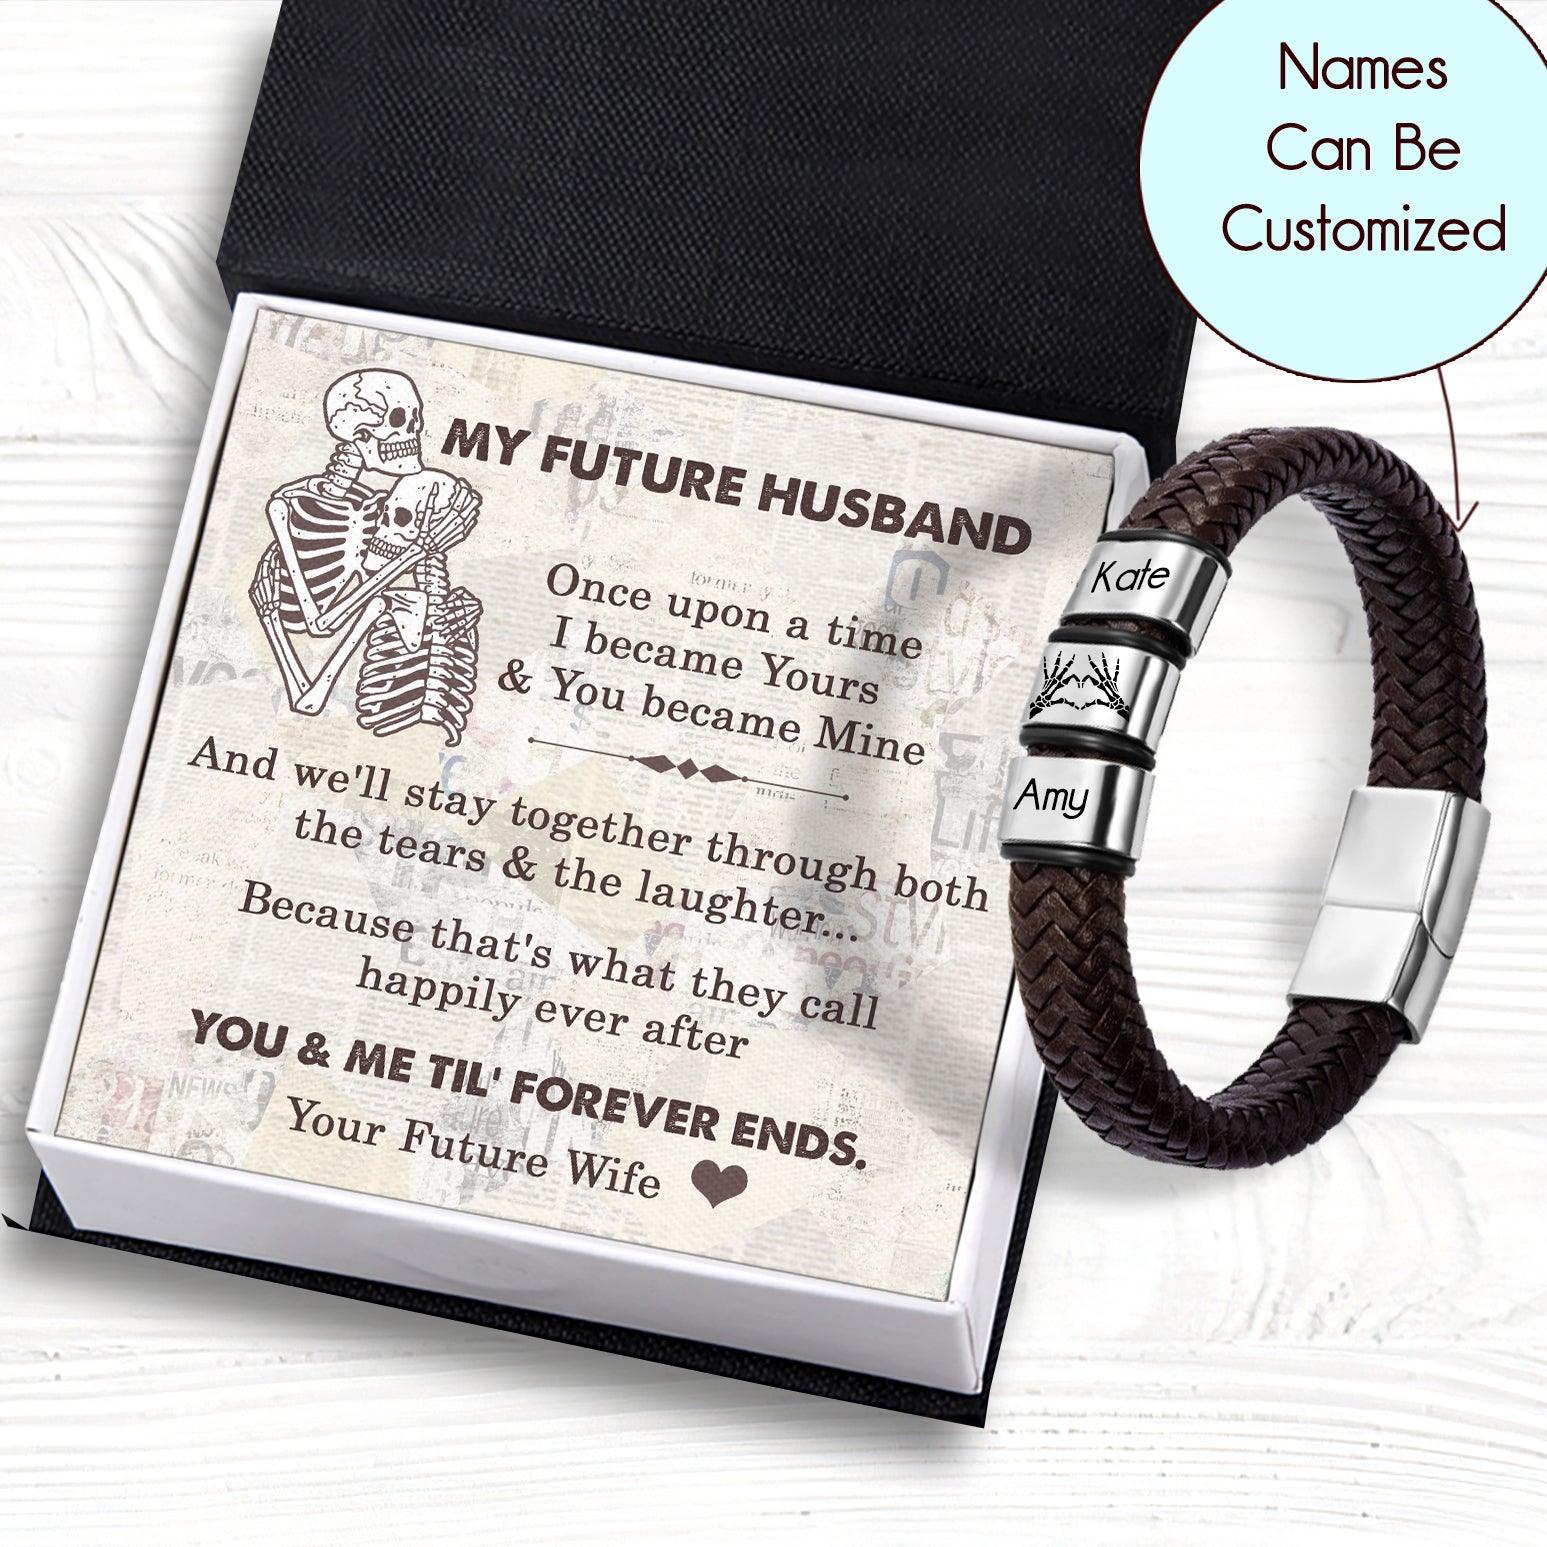 Personalized Leather Bracelet - Skull - To My Future Husband - You Became Mine - Augbzl24007 - Gifts Holder